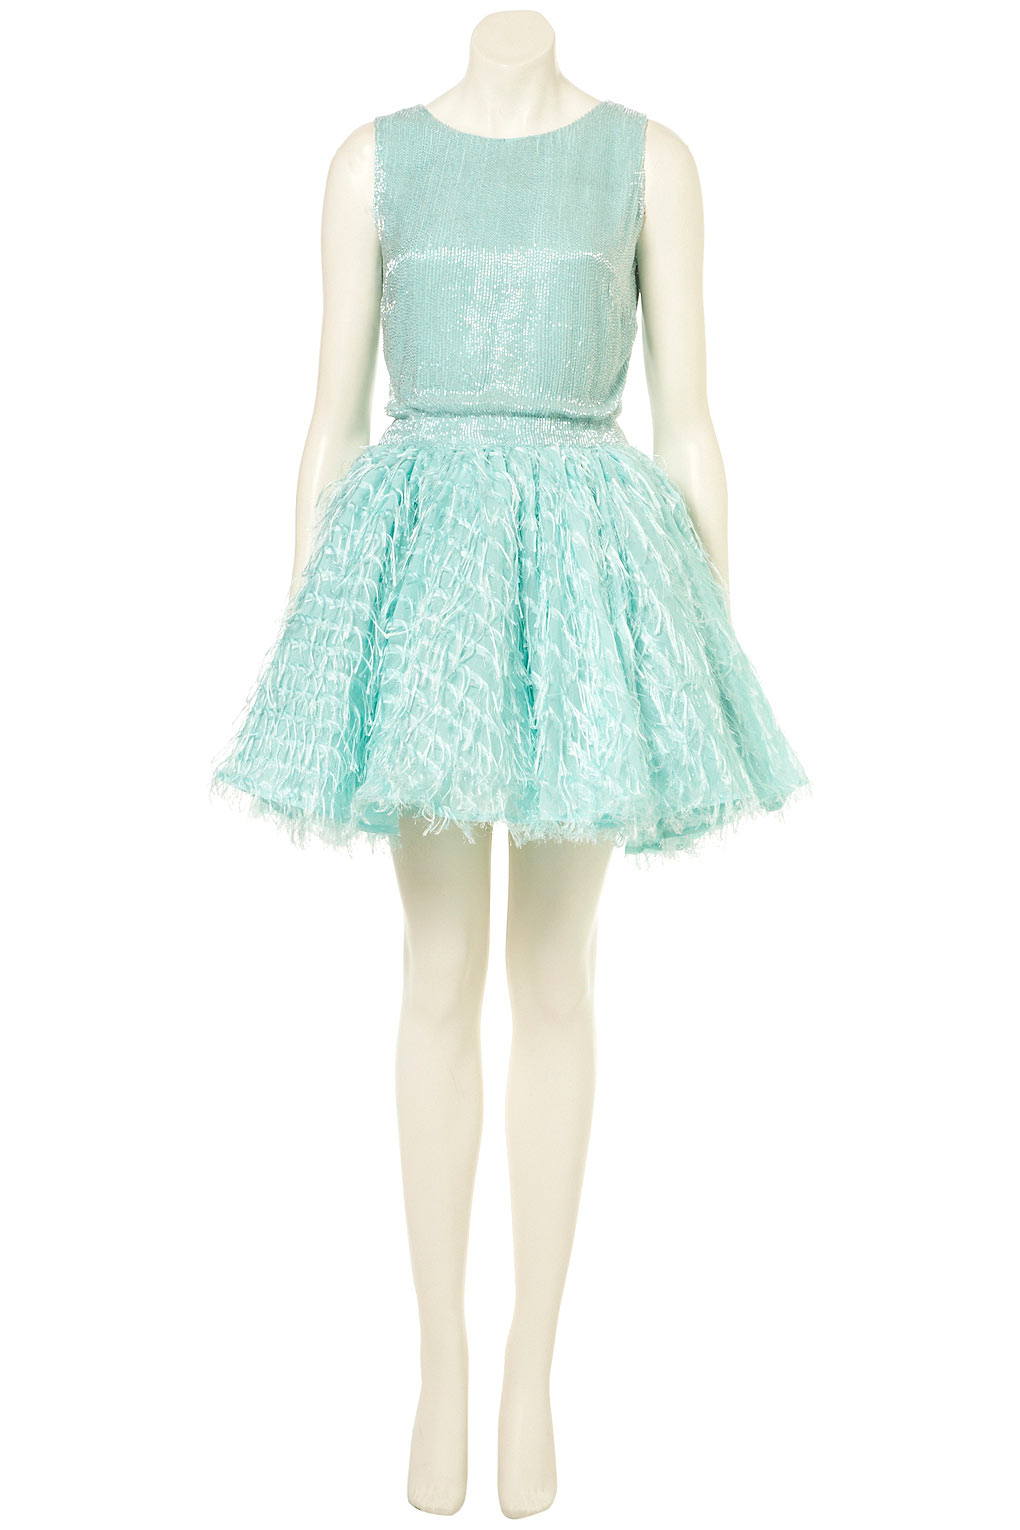 Lyst - Topshop Mint Sequin Fringe Dress By Dress Up Topshop in Green